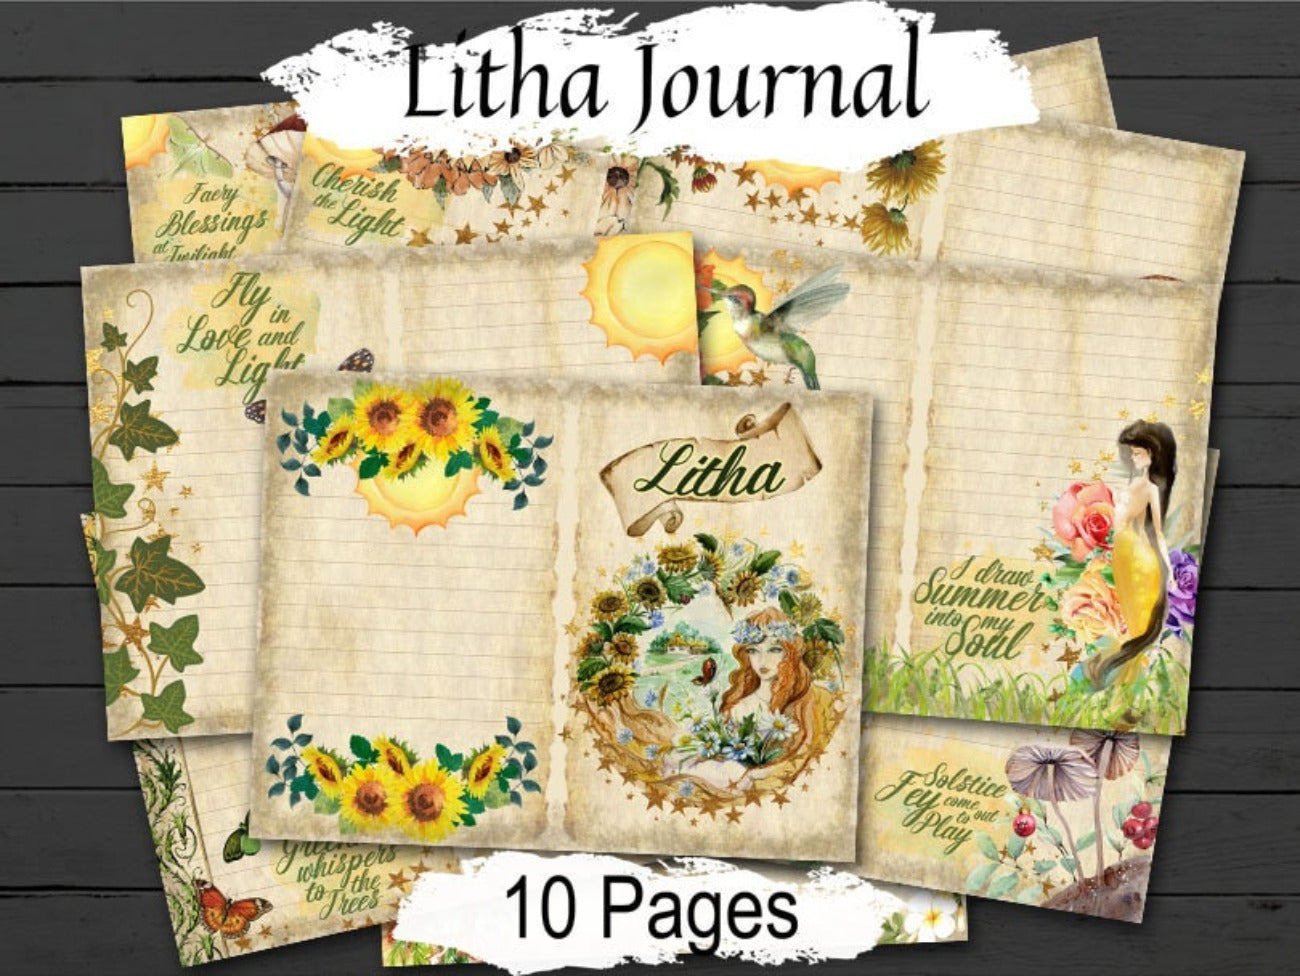 Litha journal pages by Morgana Magick Spell. Ten double pages with images and inspirational words about Summer Solstice. Pages are parchment coloured and lined.